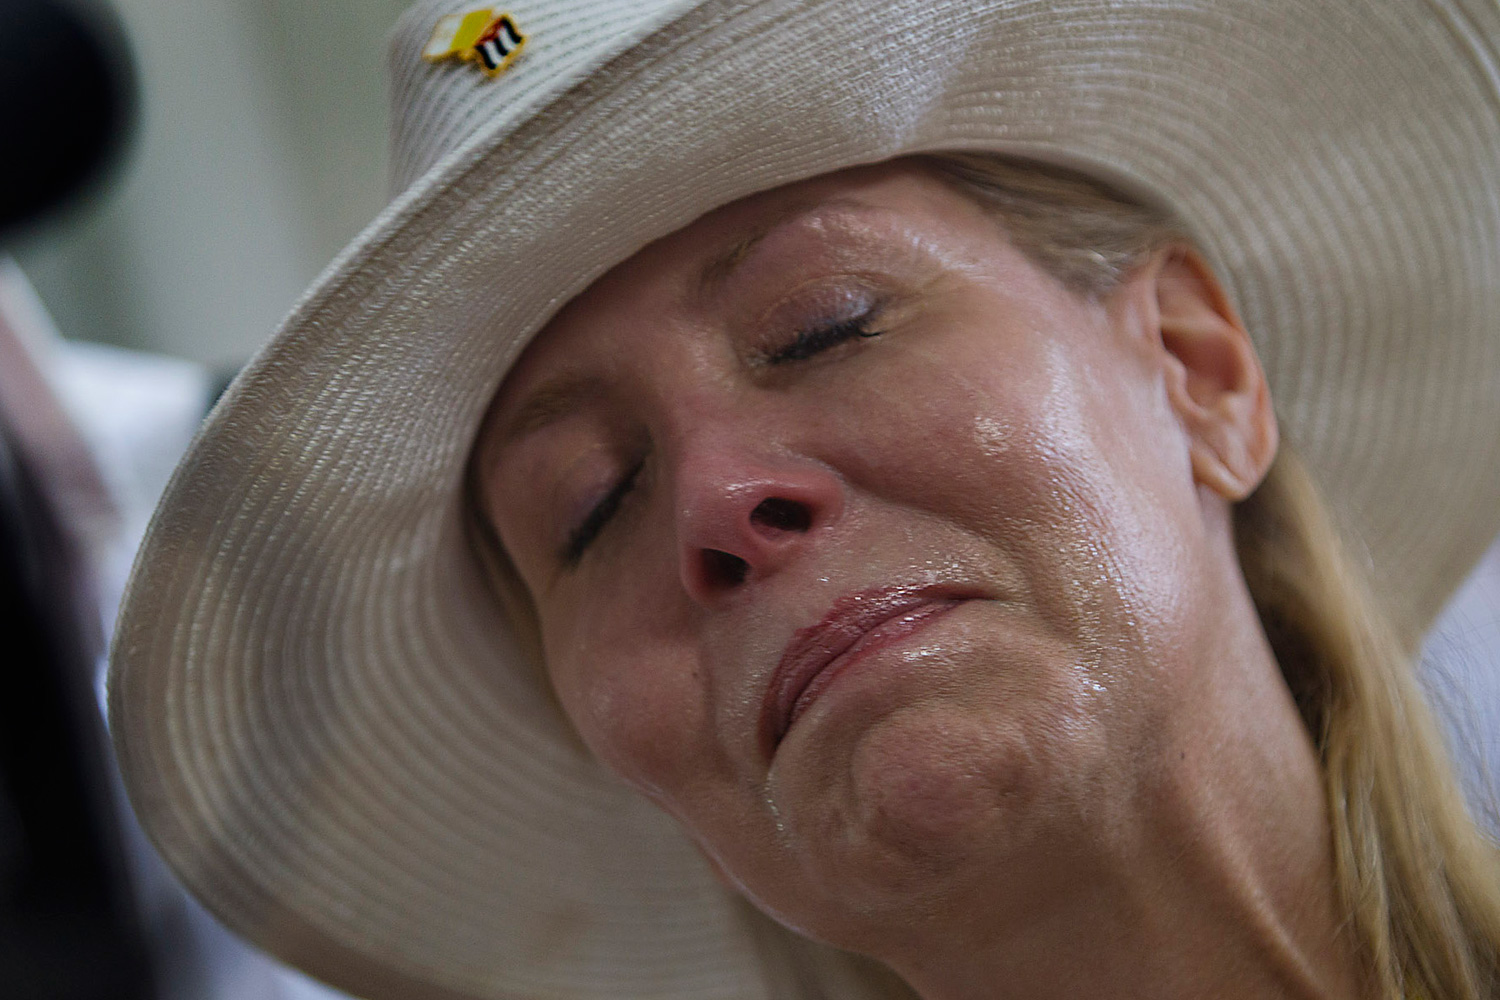 March 26, 2012. Laura Fabar-Equels is overcome with emotion as she visits the original statue of Our Lady of Charity, located in the Sanctuary of El Cobre prior to a mass by Pope Benedict XVI in the Plaza de la Revolucion Antonio Maceo in Santiago, Cuba.